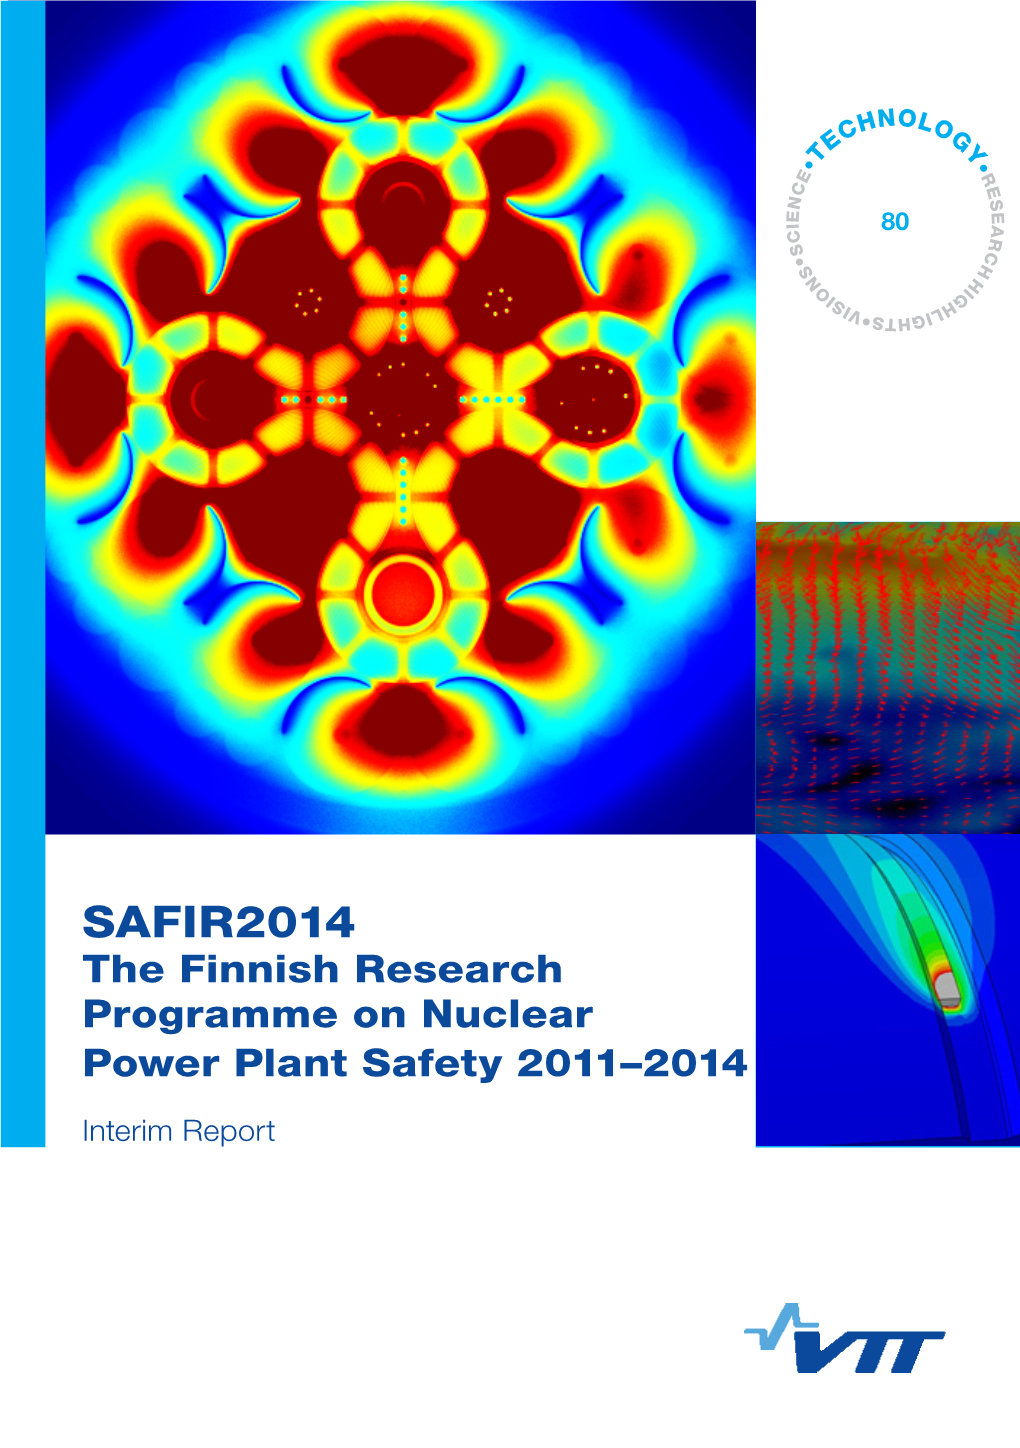 SAFIR2014. the Finnish Research Programme on Nuclear Power